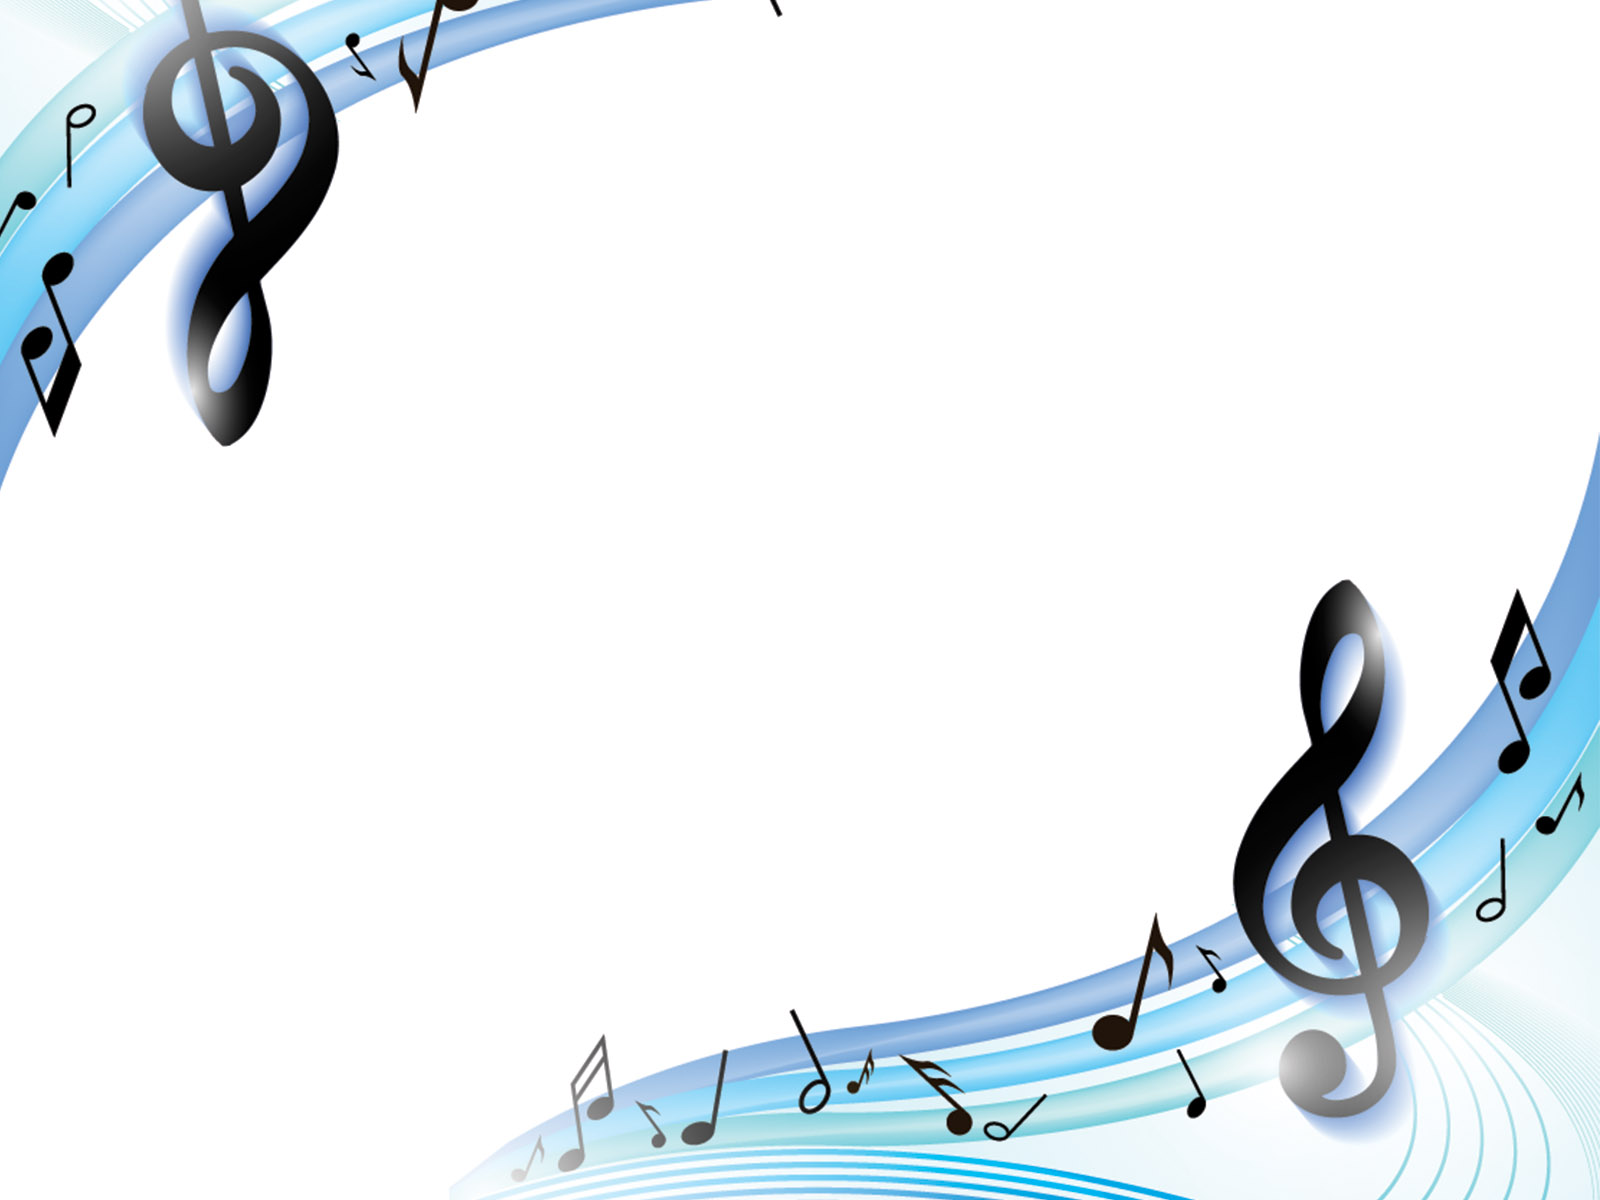 Musical Notes Border Free download on ClipArtMag